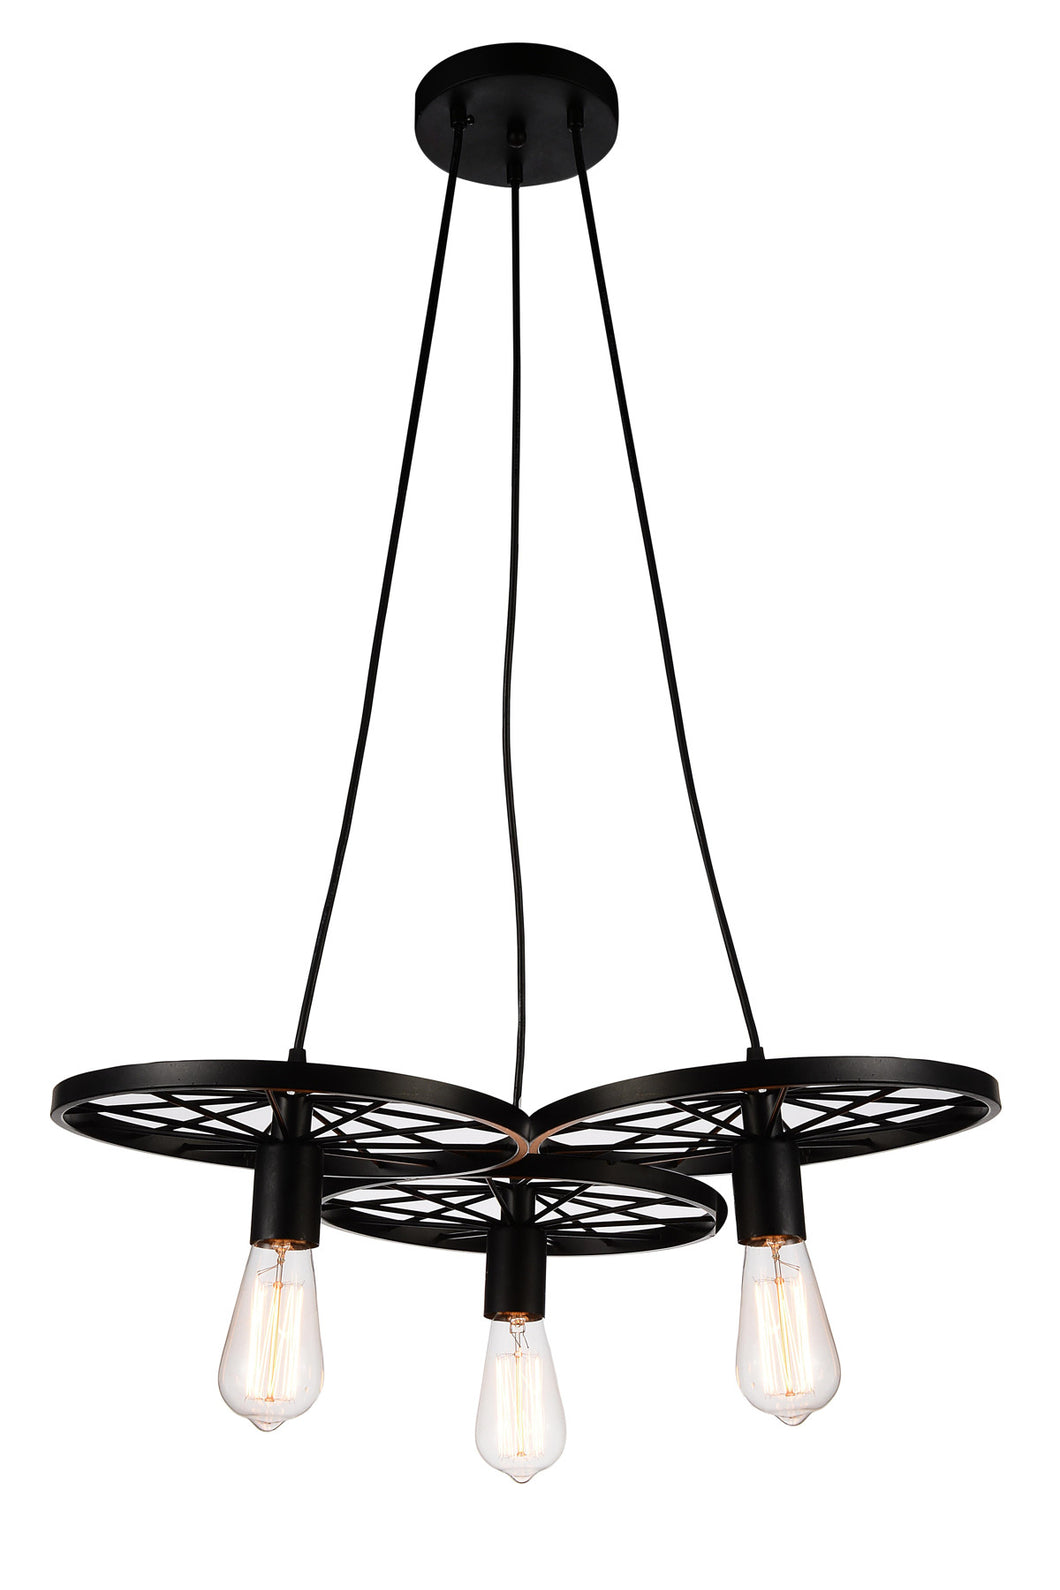 3 Light Down Chandelier with Black finish